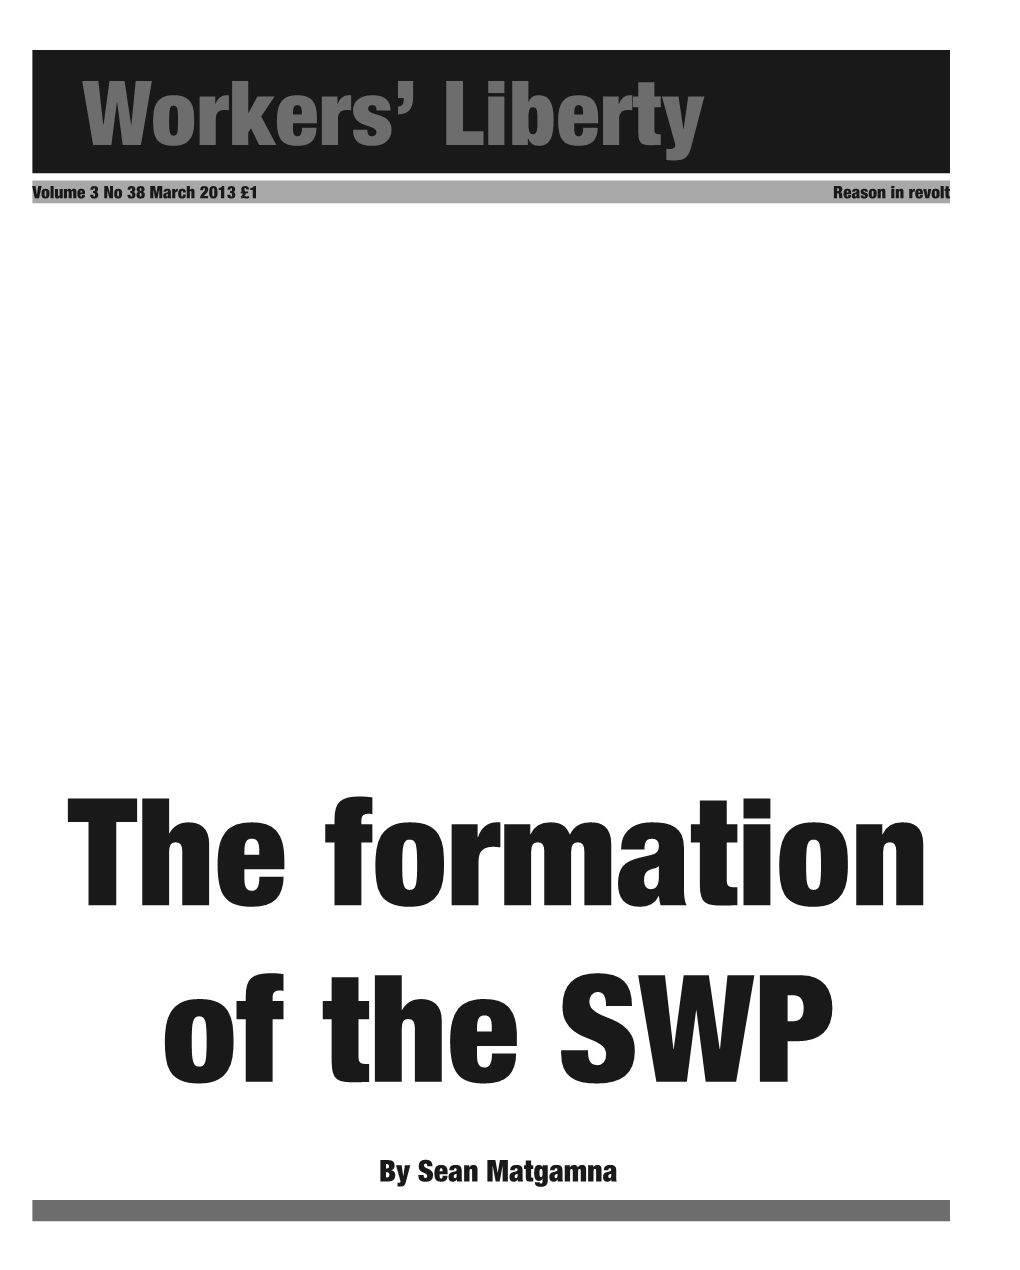 By Sean Matgamna the Formation of the SWP